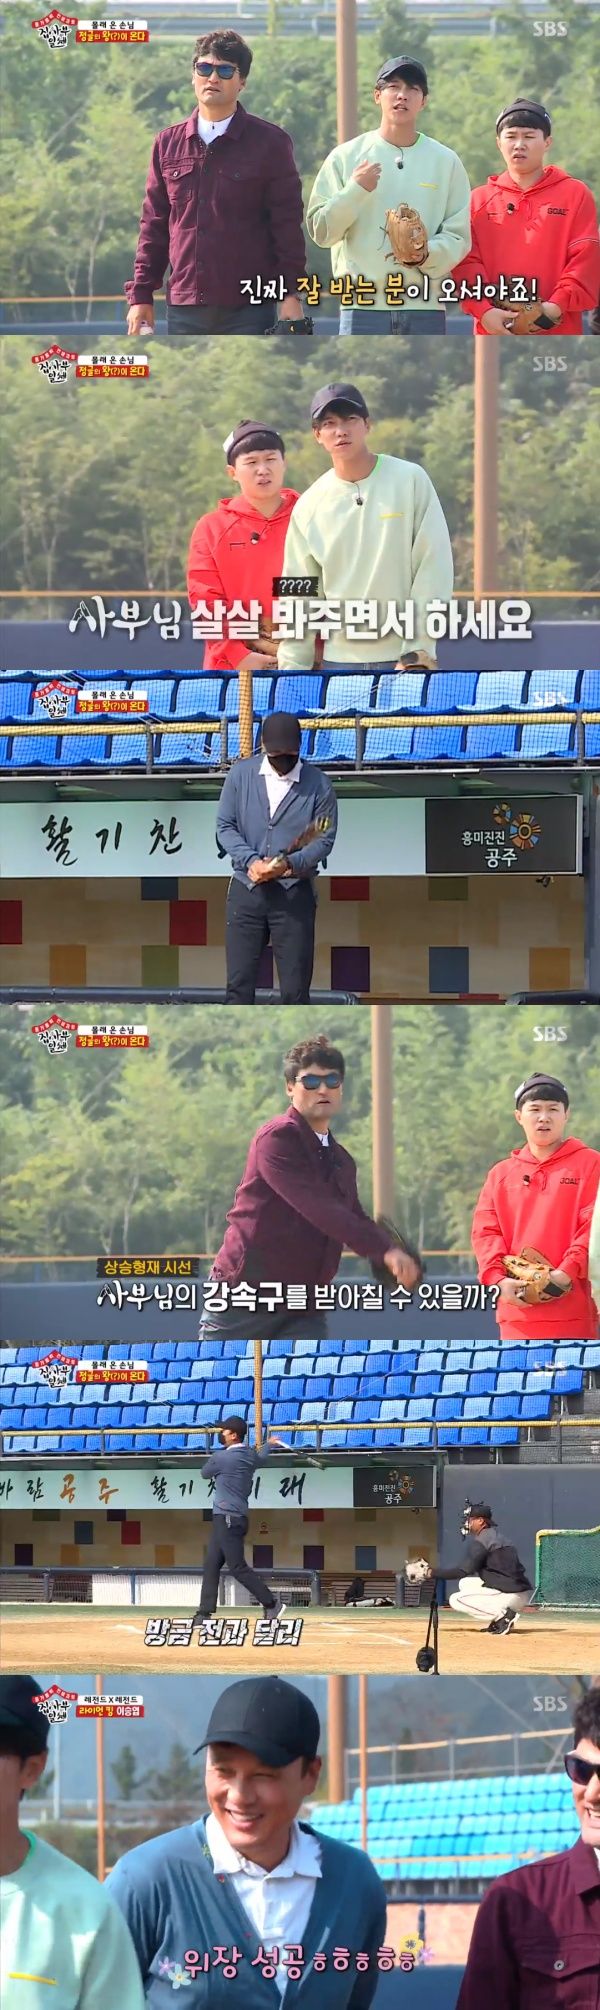 Lee Seung-gi, who did not recognize Lee Seung-yeop in All The Butlers, threw something.In the SBS entertainment program All The Butlers broadcasted on the 27th, Chan Ho Park, a baseball player, appeared in Master and shared his daily life with the members.On this day, Lee appeared as a guest secretly from Chan Ho Park, sitting in a dugout with a hat and a mask to deceive the members.Then he was in the batters seat to hit the ball by Chan Ho Park, members who had not noticed until then; Chan Ho Park threw the ball into the first pitch.Lee Seung-gi, who saw this, laughed at the fact that he was embarrassed and nervous at the plate because his master threw it.The next hitter flew to the right fence at once. The members who felt strangely asked Lee Seung-yeop, How much baseball did you play? Lee Seung-yeop held up three fingers.Three years? he said.The third hit was Lee Seung-yeop, who made a home run. Soon Lee Seung-yeop approached the members and revealed his identity.Yook Seong-jae didnt miss it.He said to Lee Seung-gi, Is your brother Lee Seung-yeop saying, It is a social baseball team, and I am not an amateur, so I can not form. 